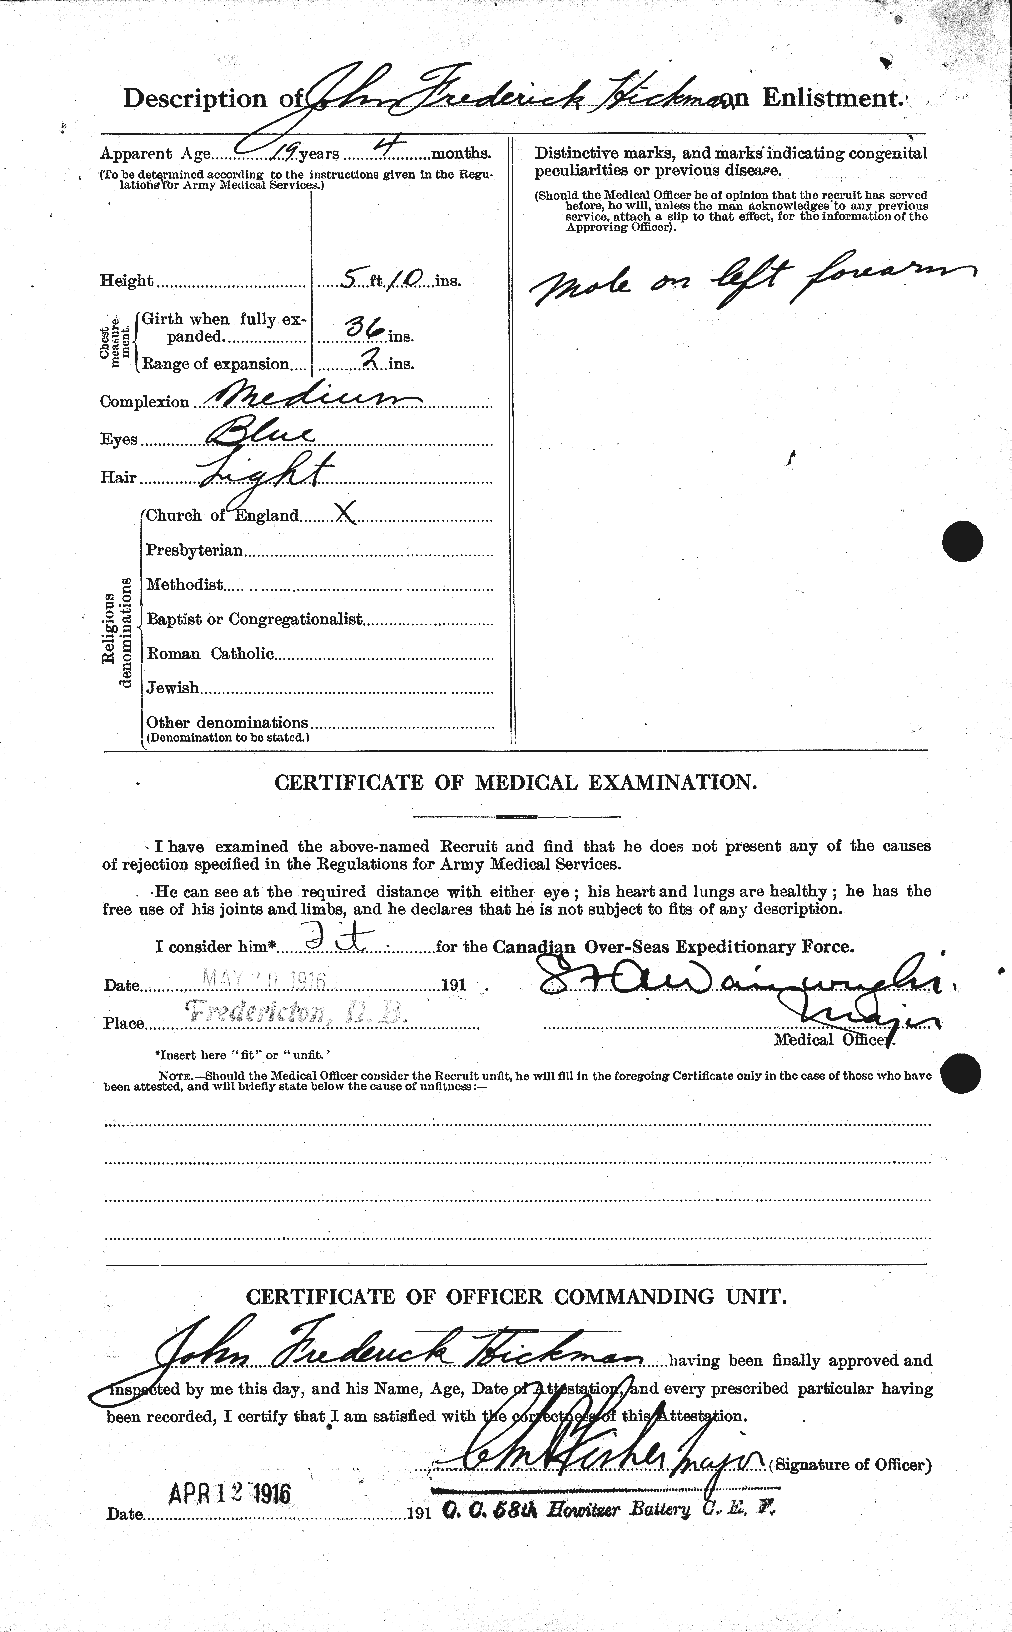 Personnel Records of the First World War - CEF 390989b